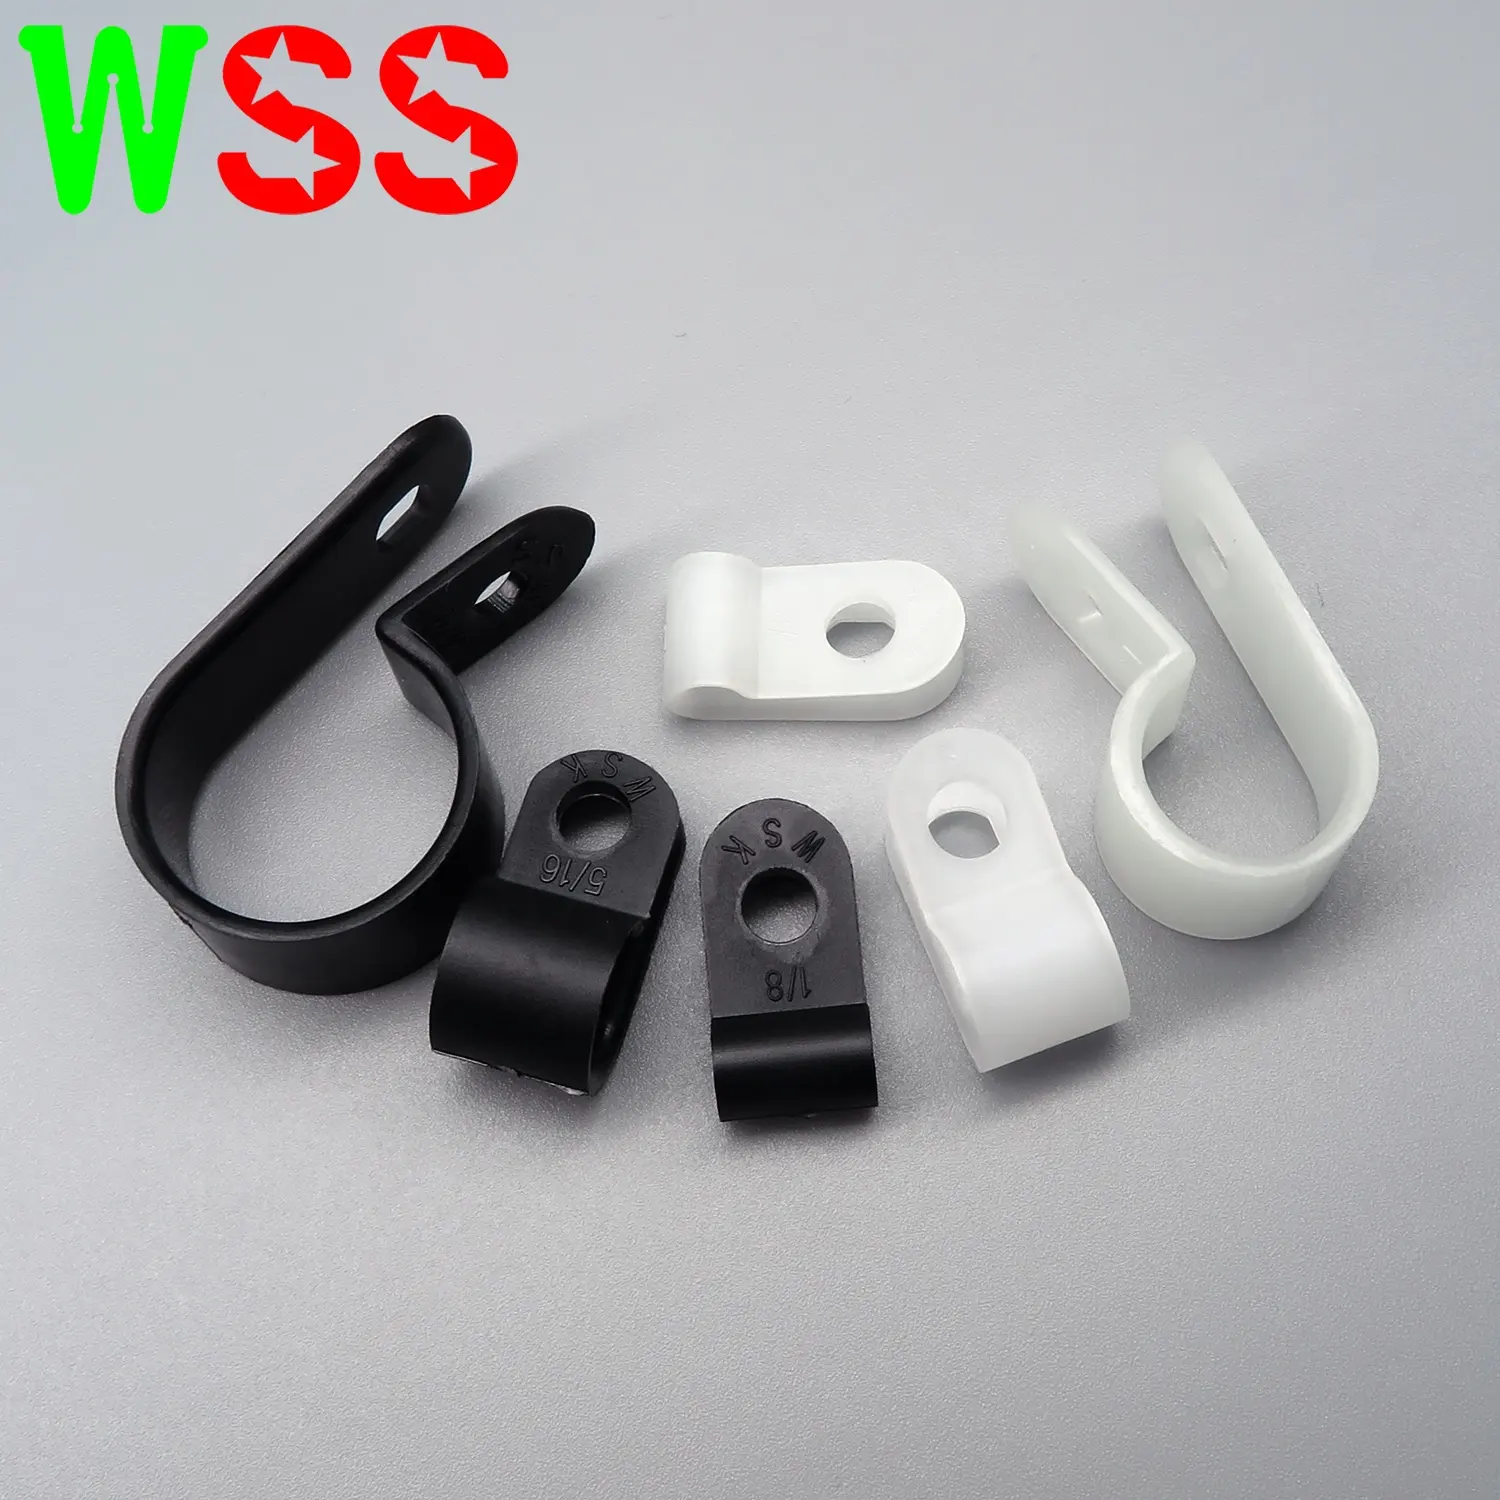 WSS Nylon Plastic R-Type Wire Clips 1/4" 5/16" 3/8" 1/2" 5/8" 3/4" Clamps Fasteners Assortment for Cable Conduit Cord Organizer